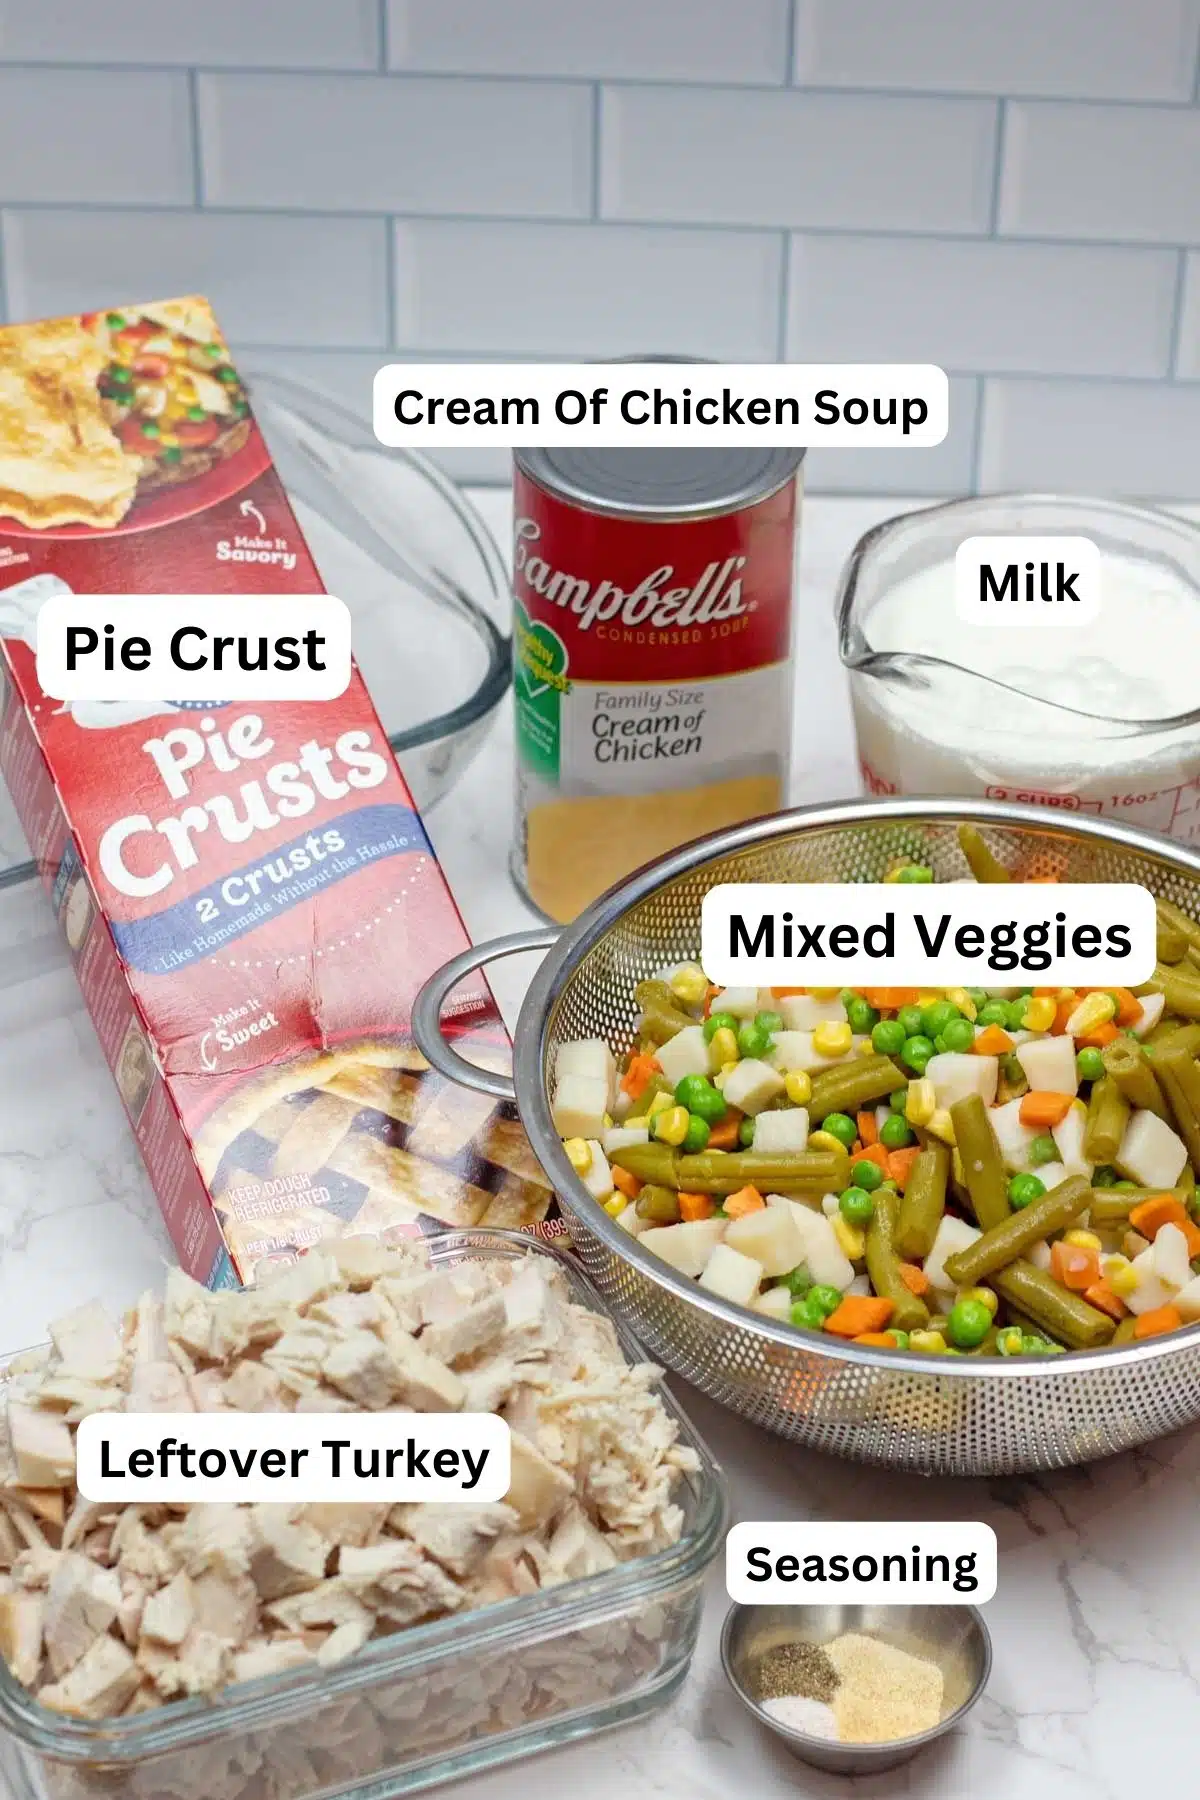 Tall ingredient image of whats needed for leftover turkey pot pie casserole.